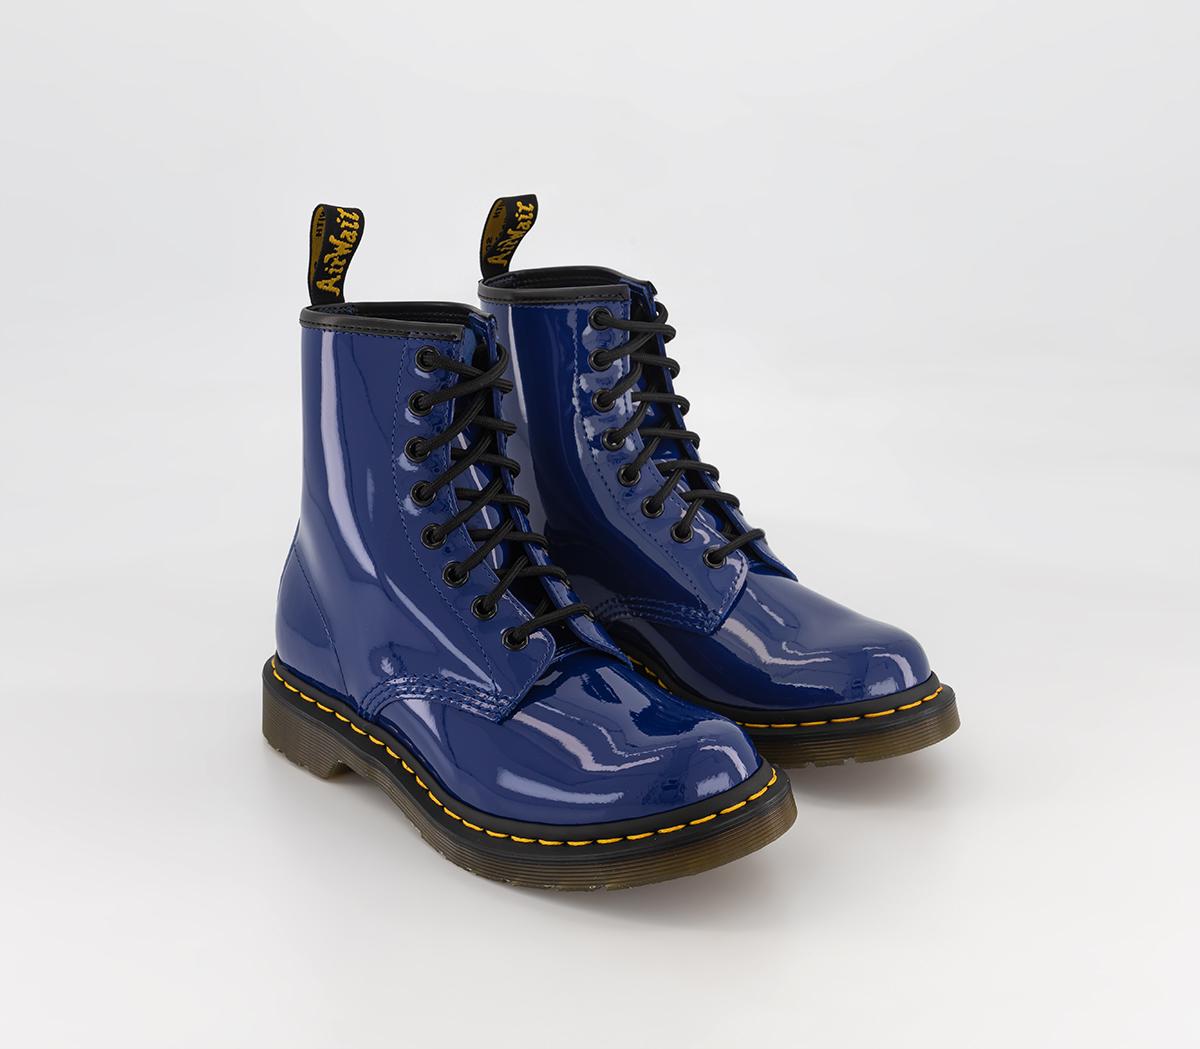 Dr. Martens 8 Eyelet Lace Up Boots Blueprint Patent - Women's Ankle Boots